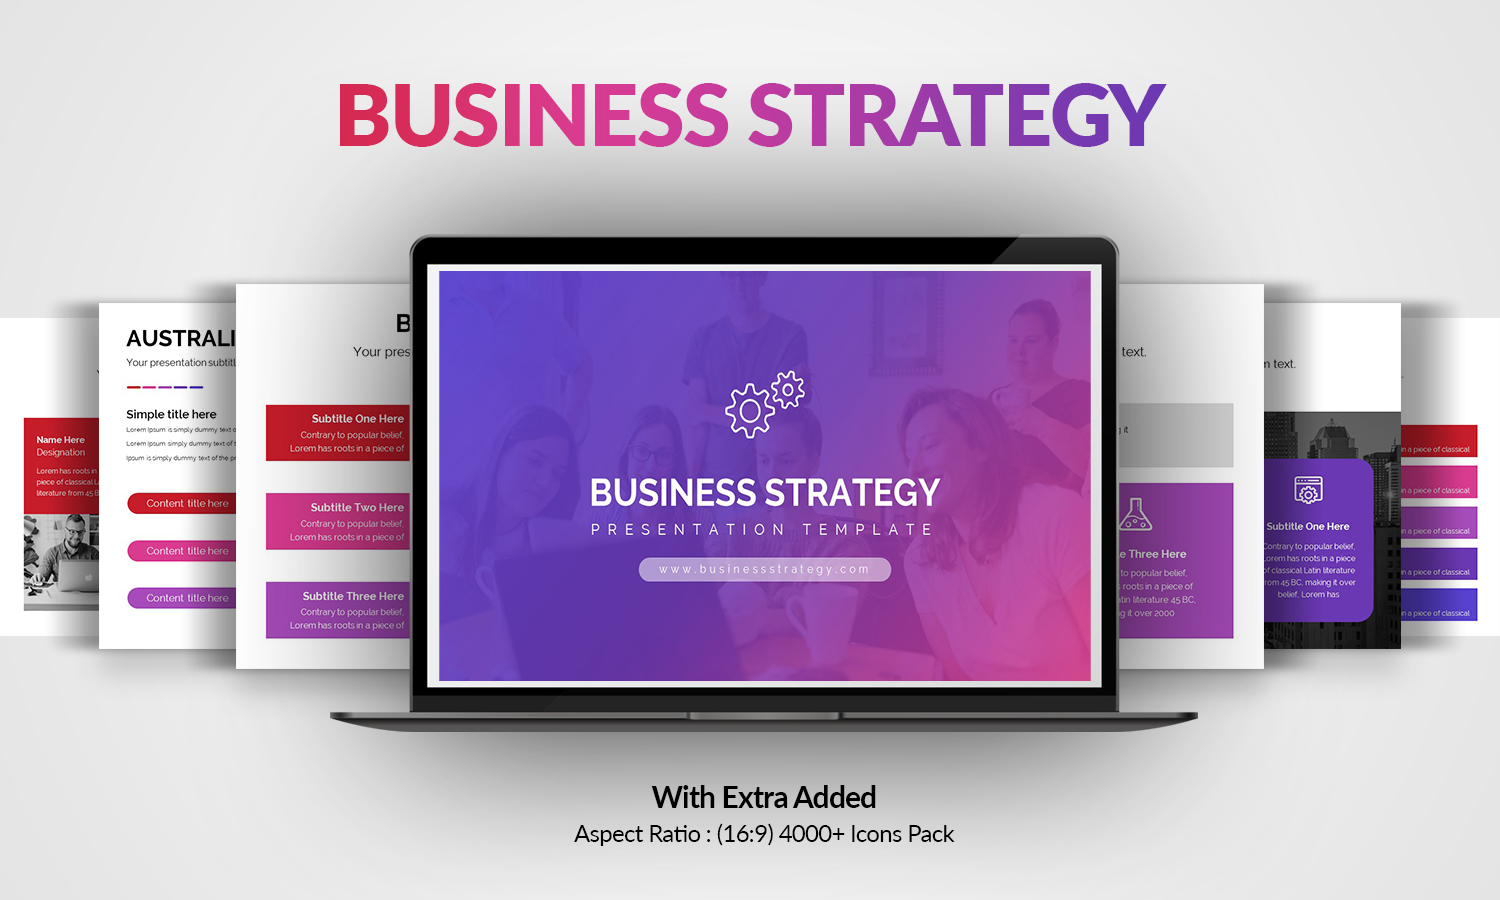 Business Strategy Keynote Template for Presentation